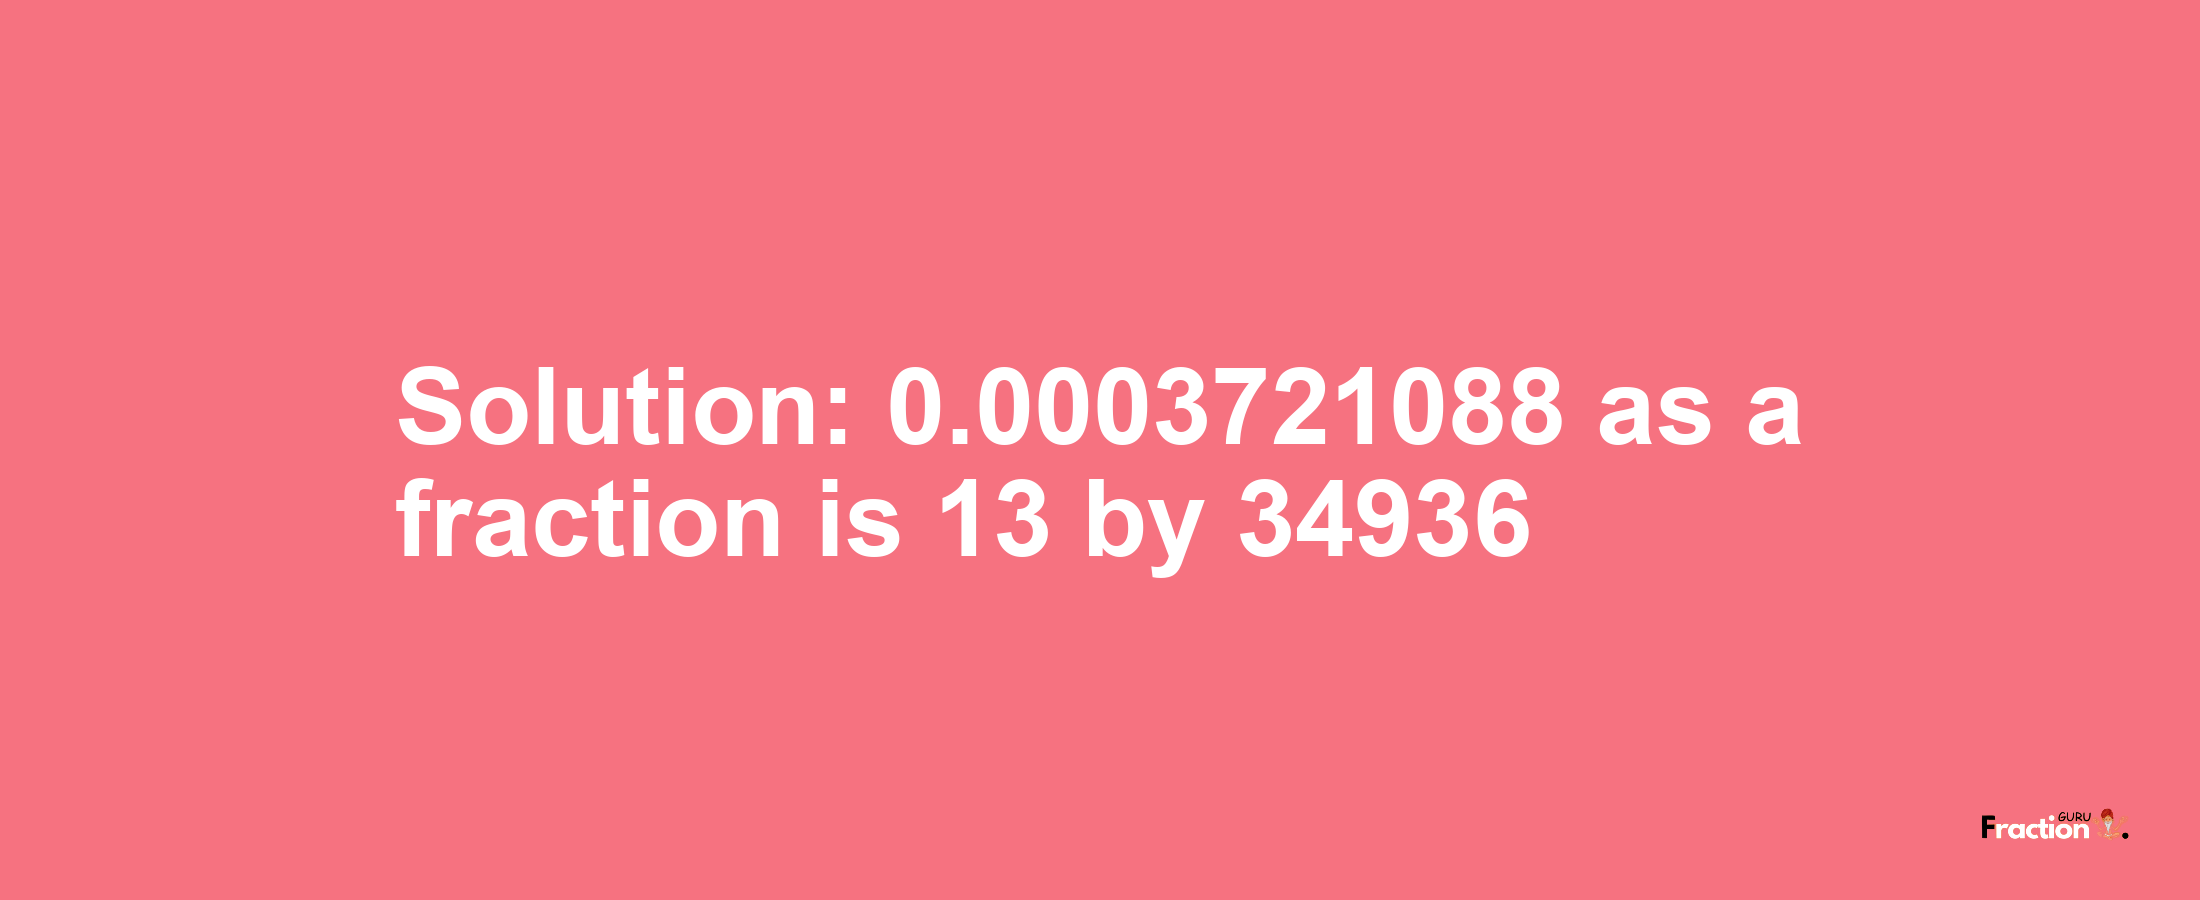 Solution:0.0003721088 as a fraction is 13/34936